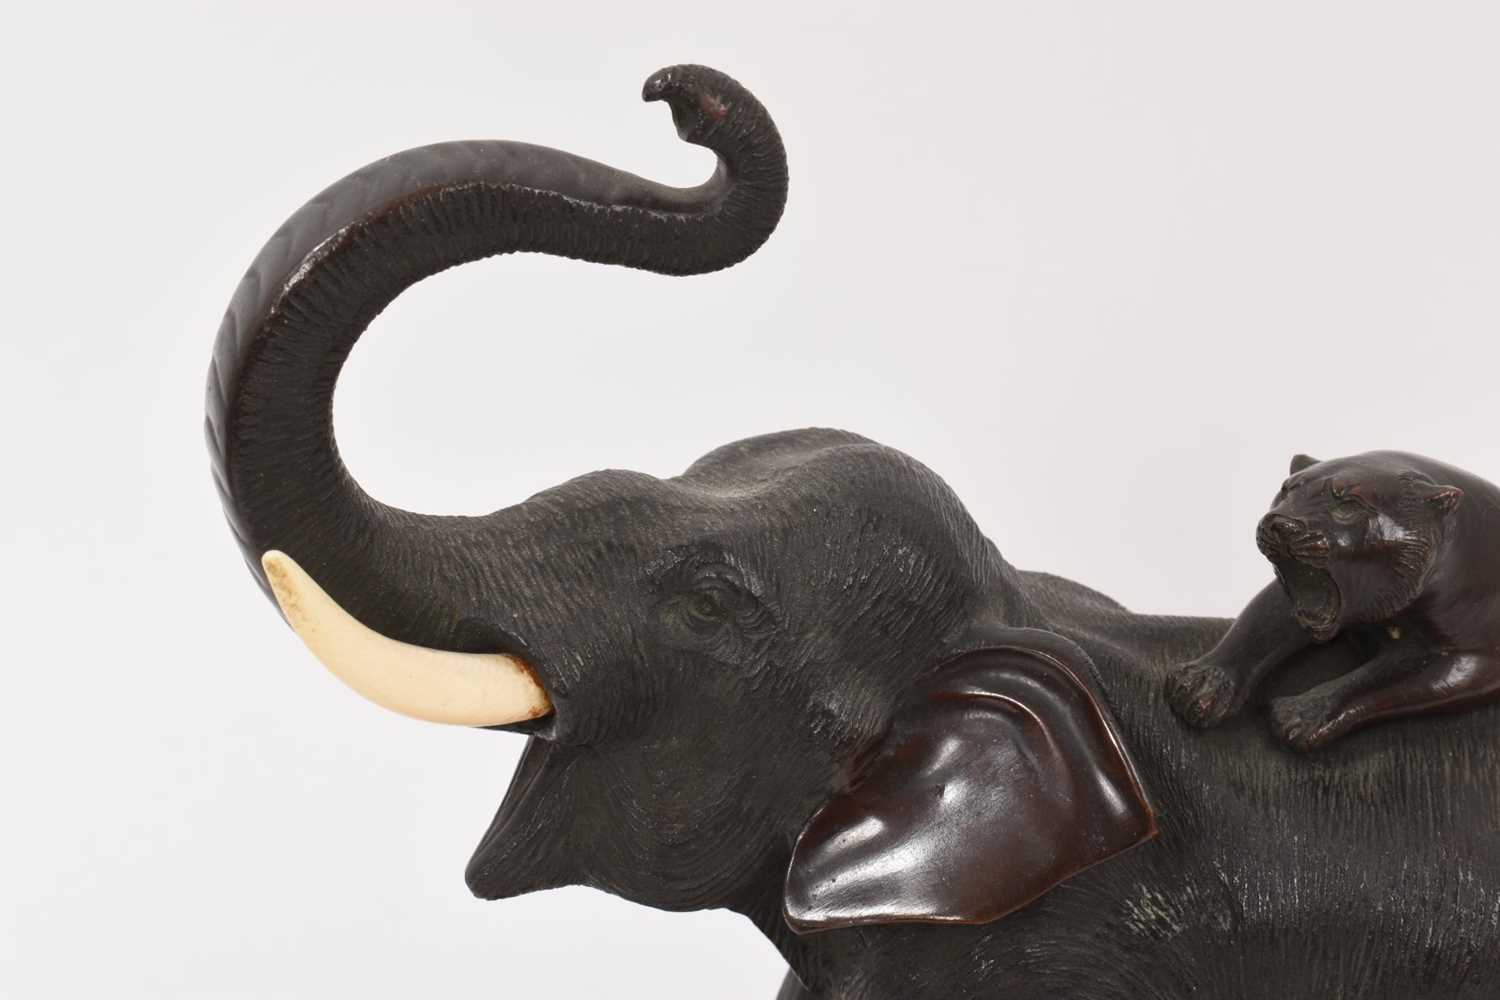 Late 19th century/early 20th century Japanese bronze sculpture of an elephant - Image 2 of 5